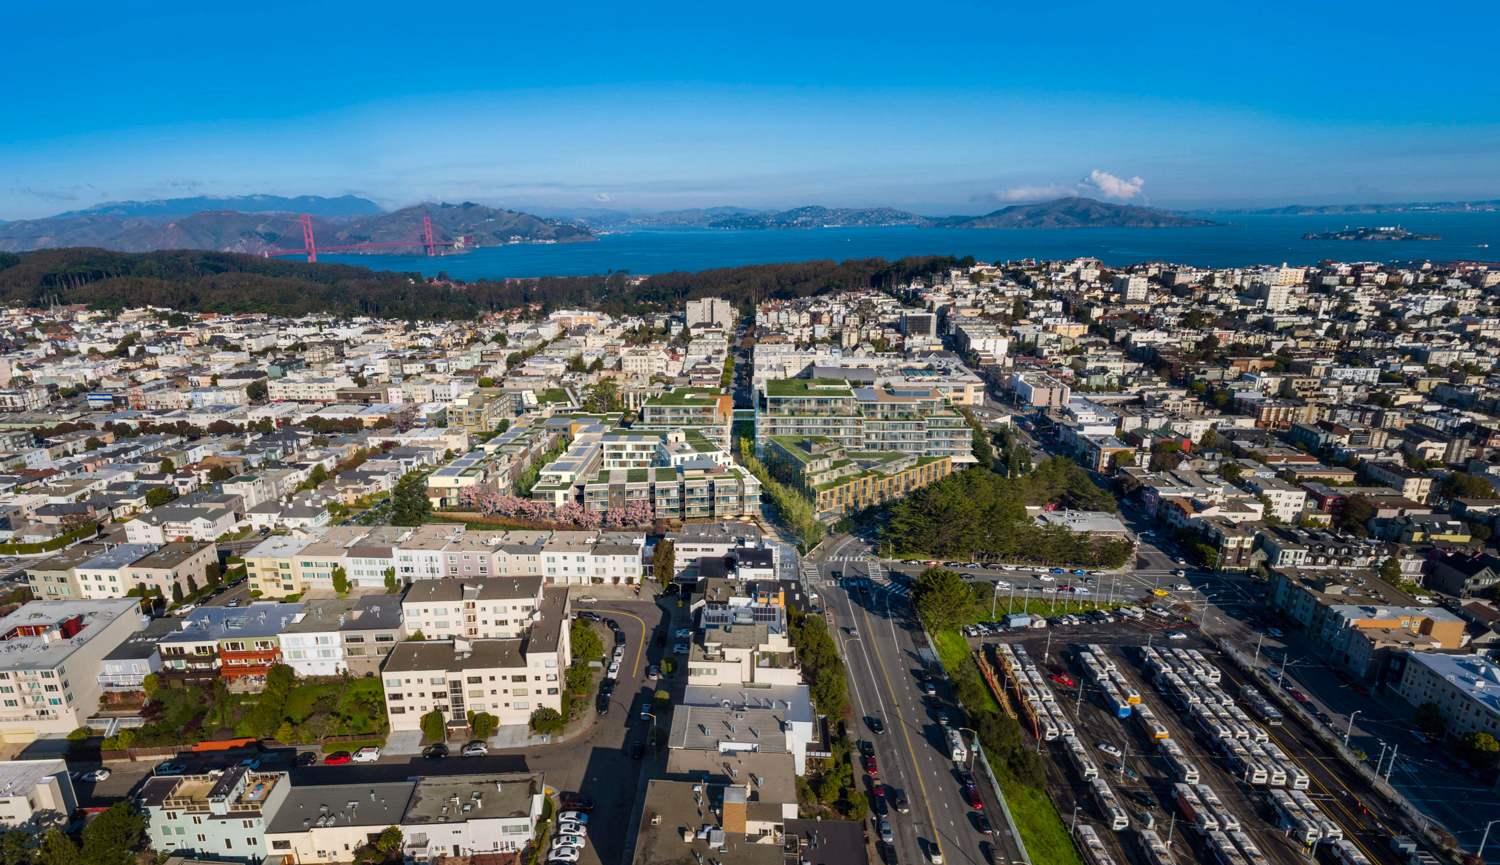 3333 California Street aerial view looking north toward Marin County and the Golden Gate Bridge